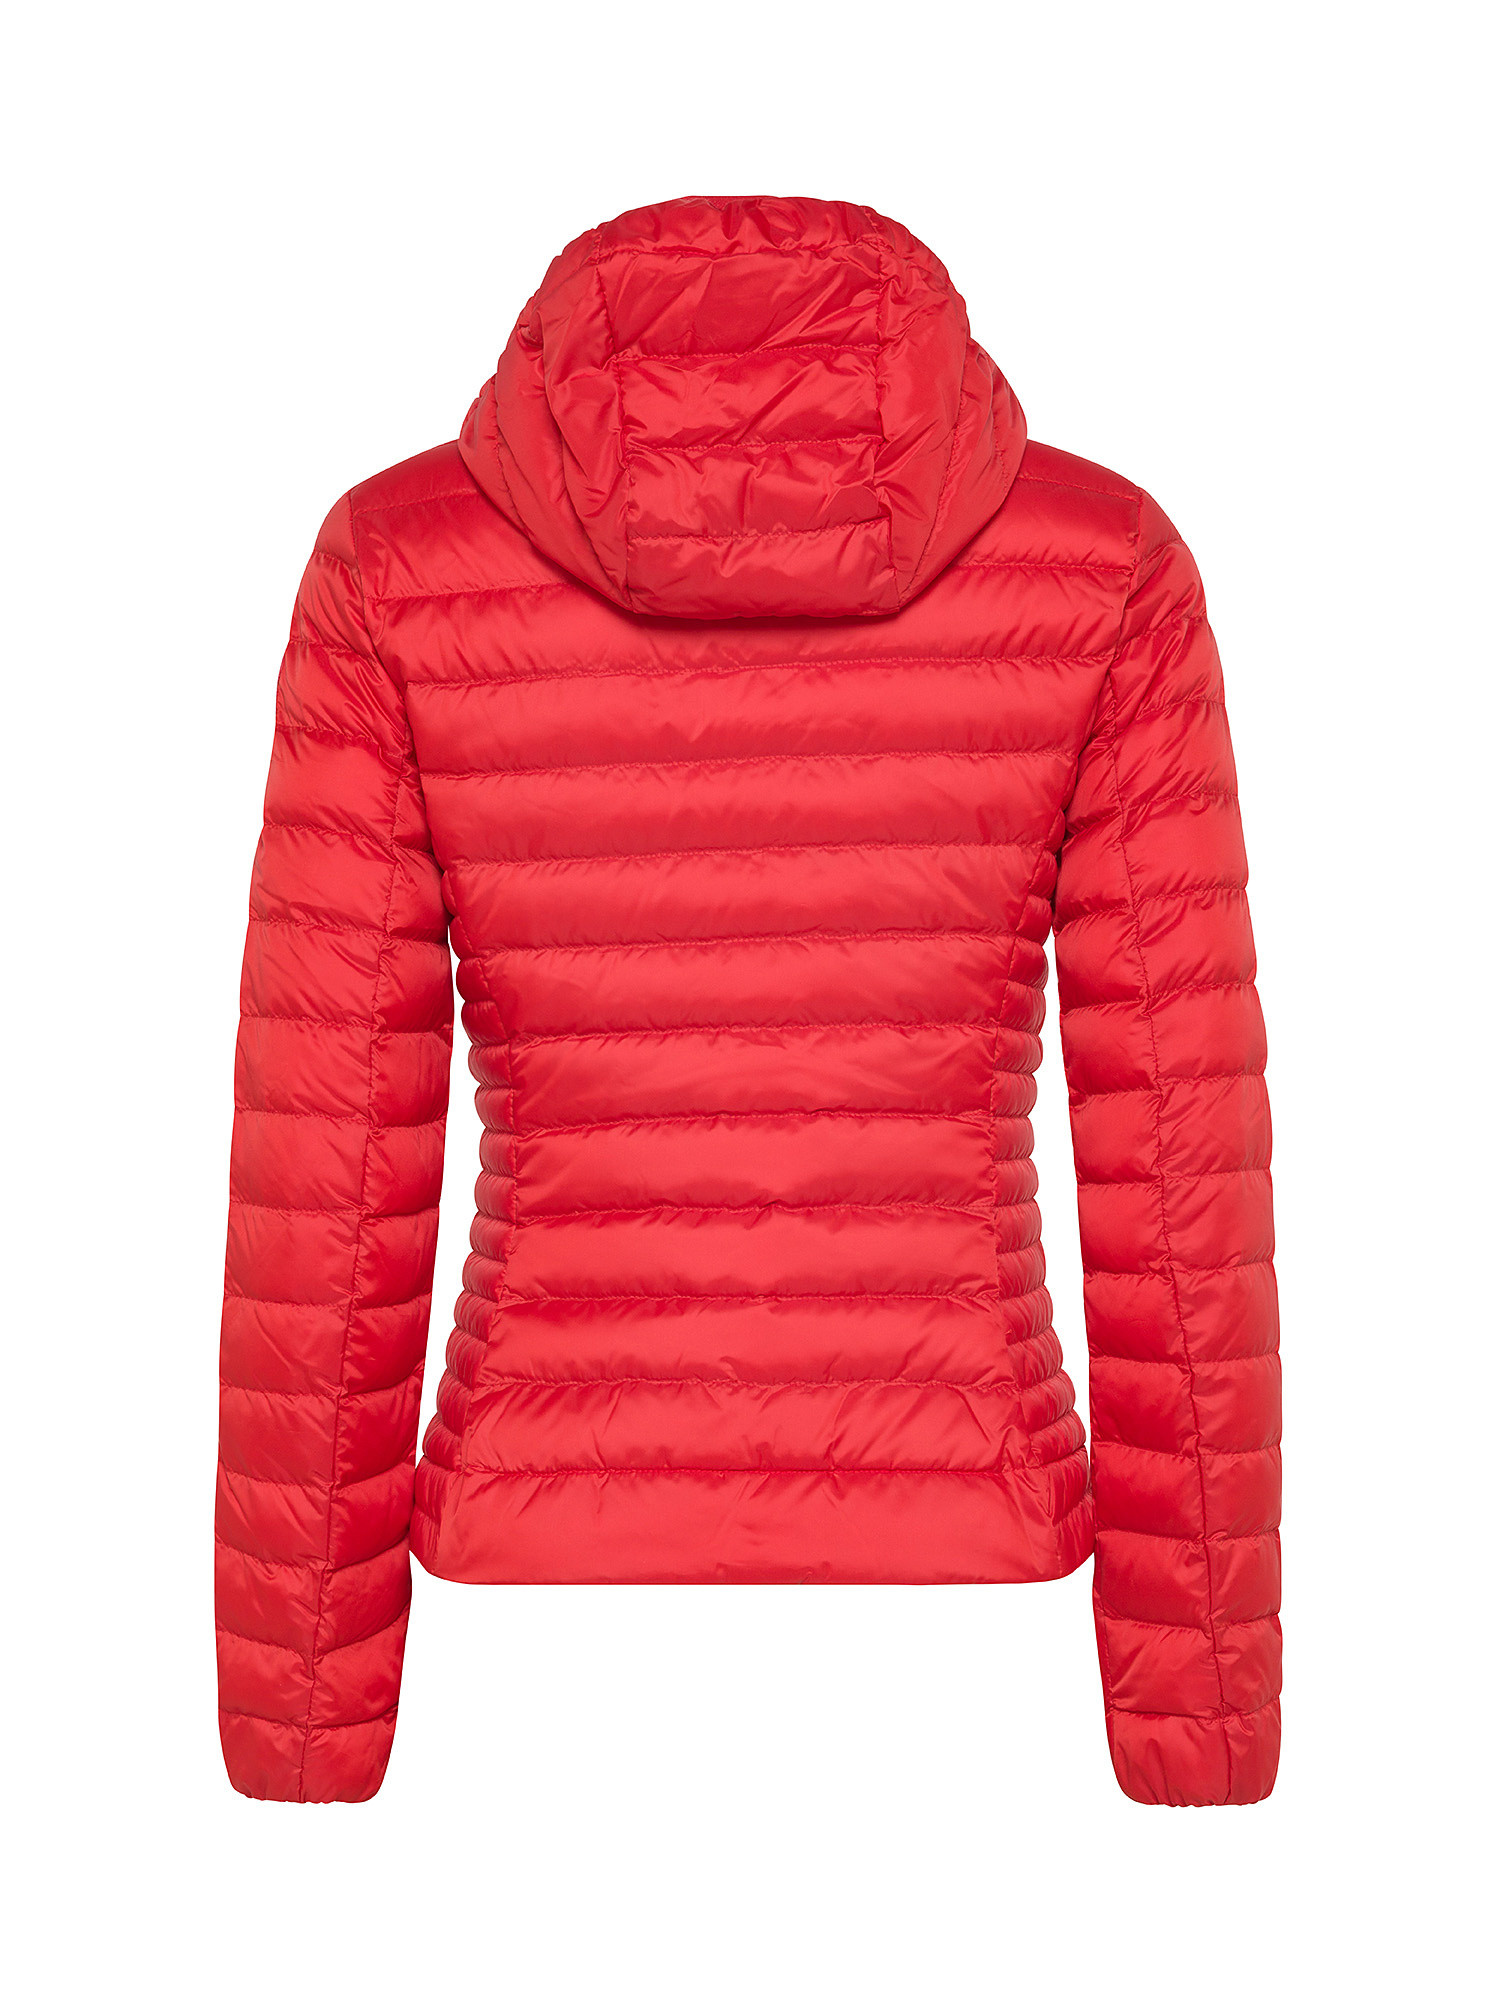 Ciesse Piumini - Carrie down jacket with hood, Red, large image number 1